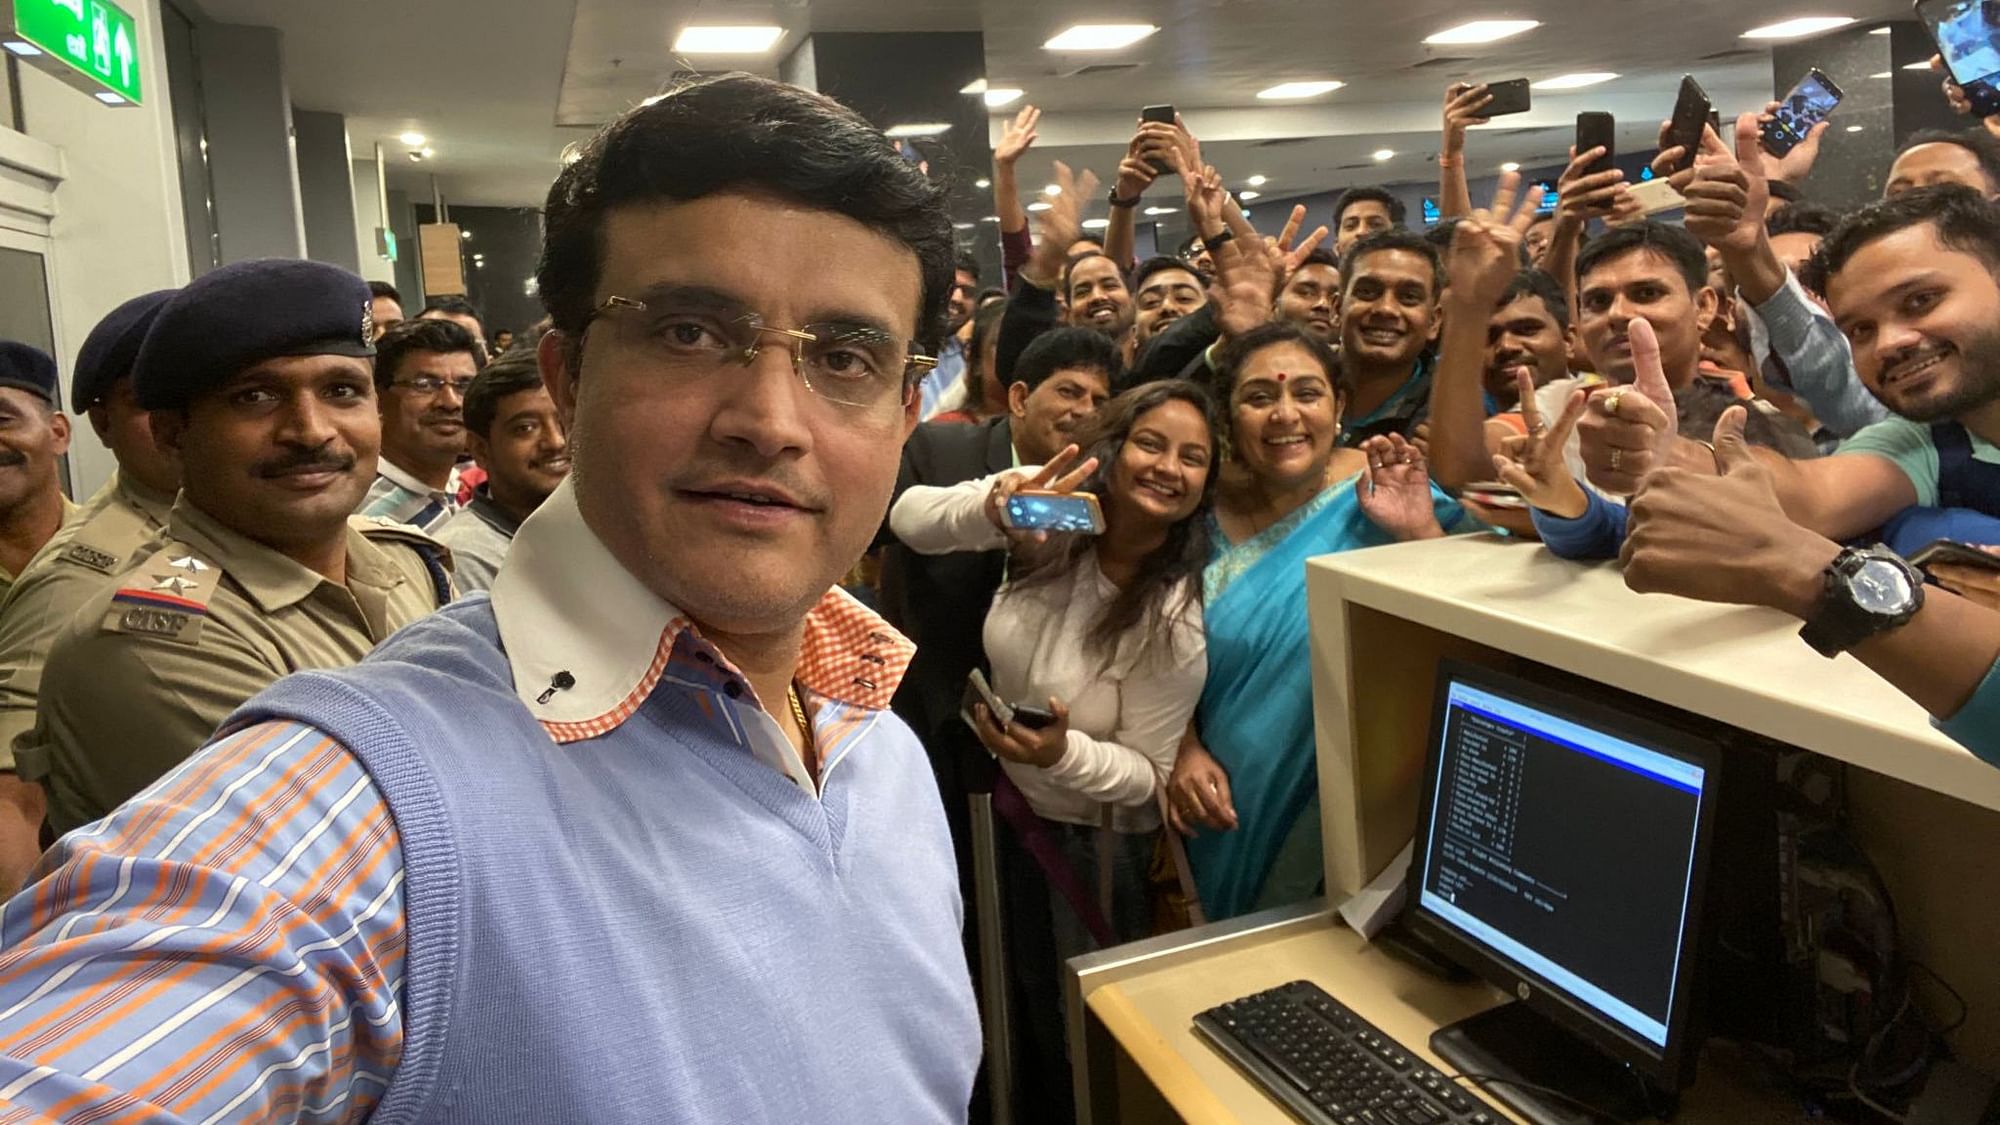 Sourav Ganguly posted a selfie with his fans on his Twitter account on Wednesday, 30 October.&nbsp;